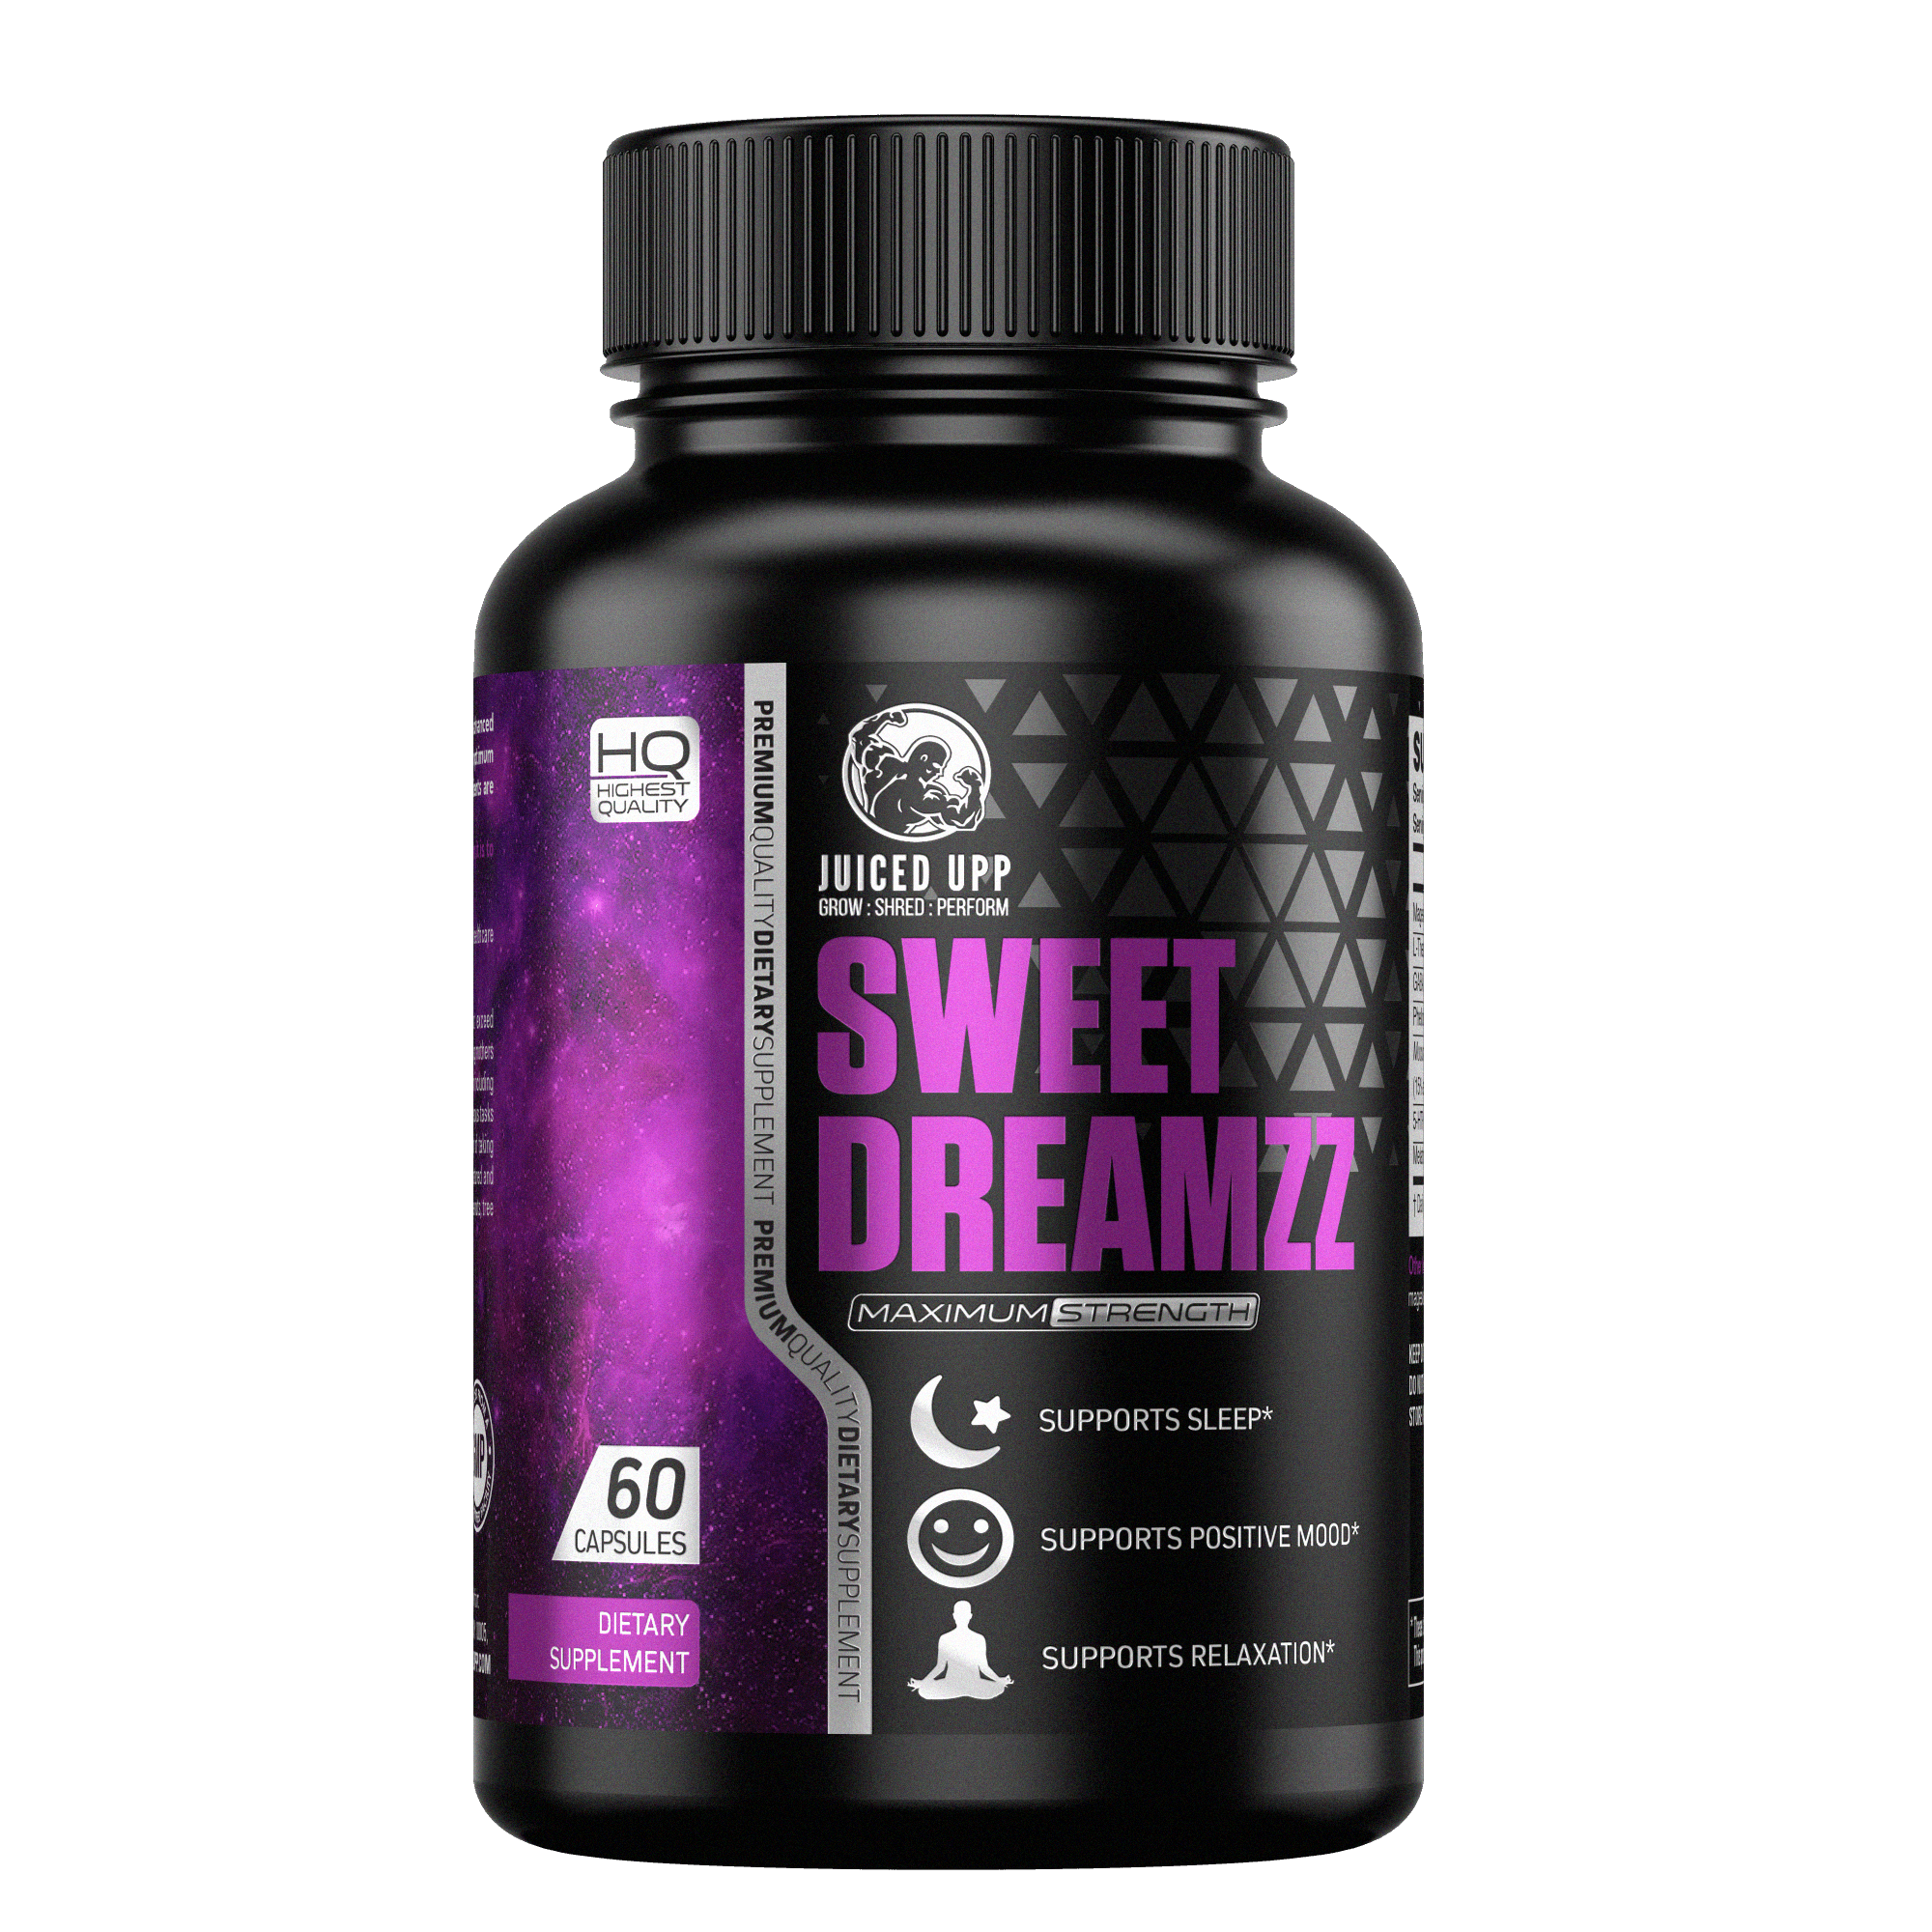 SWEET DREAMZZ - Juiced Upp - 100% Natural Fitness and Wellbeing Supplements